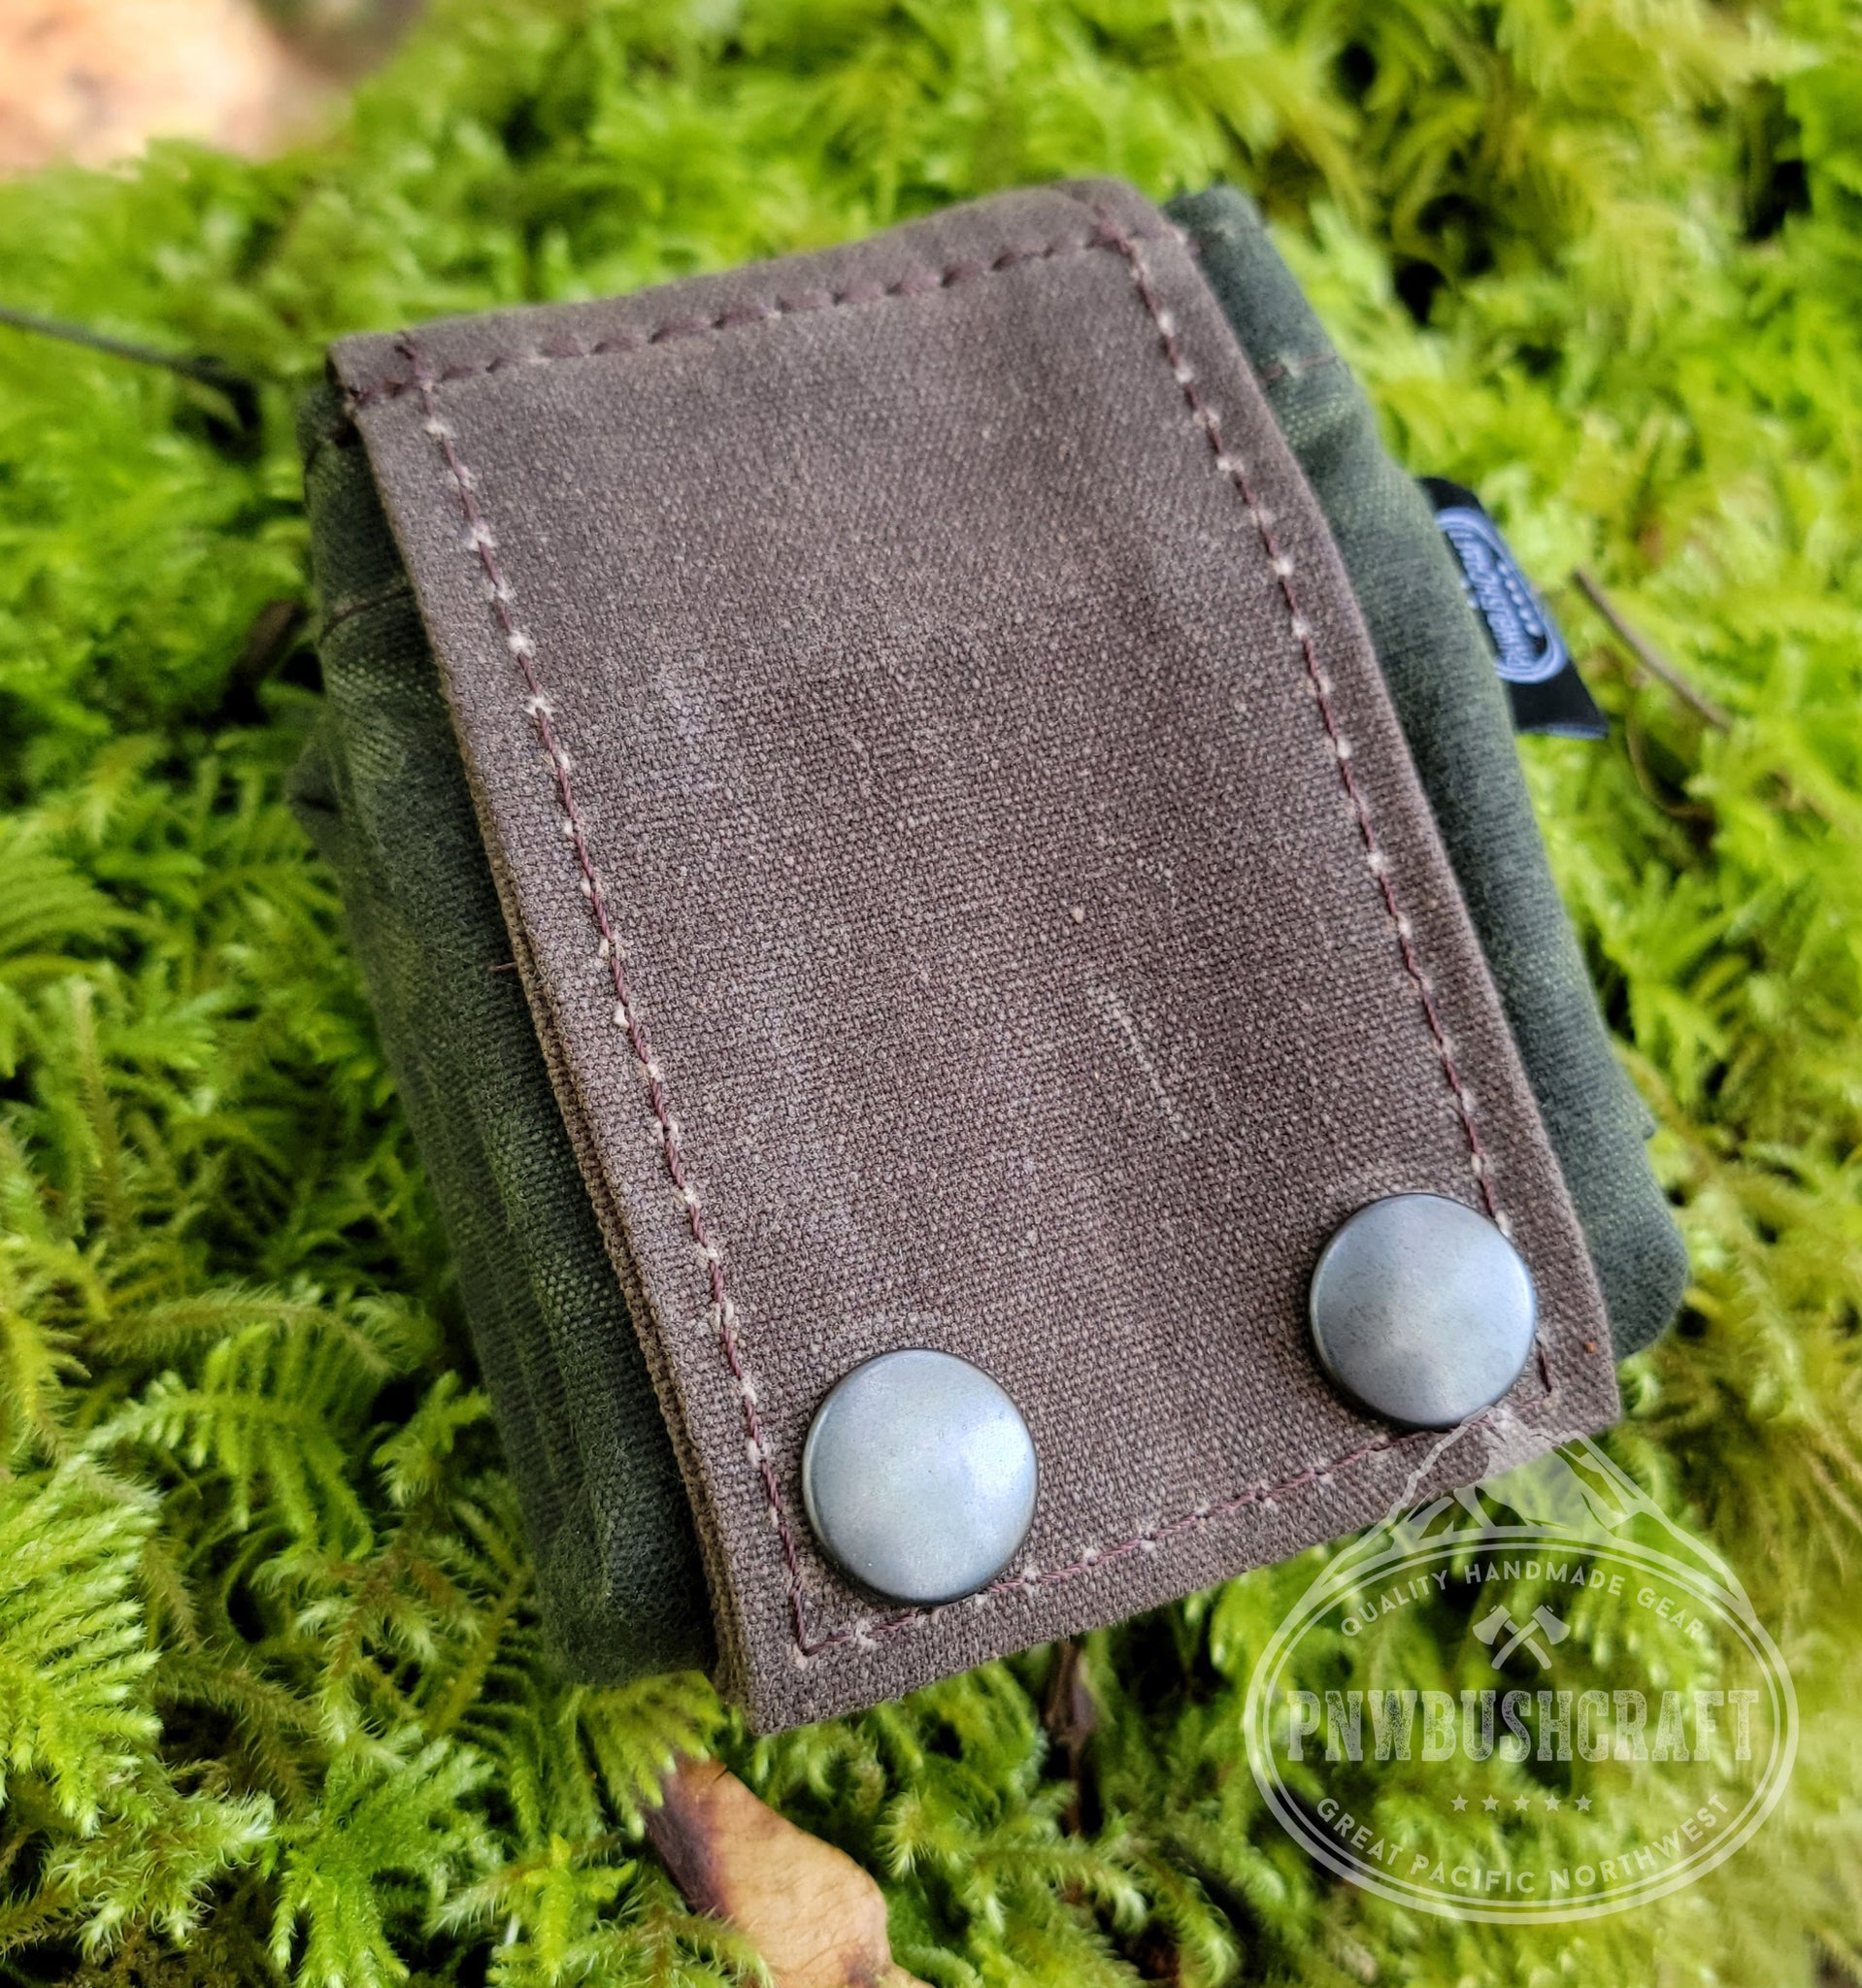 Foraging Pouch, Foraging Bag, Dump Pouch, Waterproof Waxed Canvas